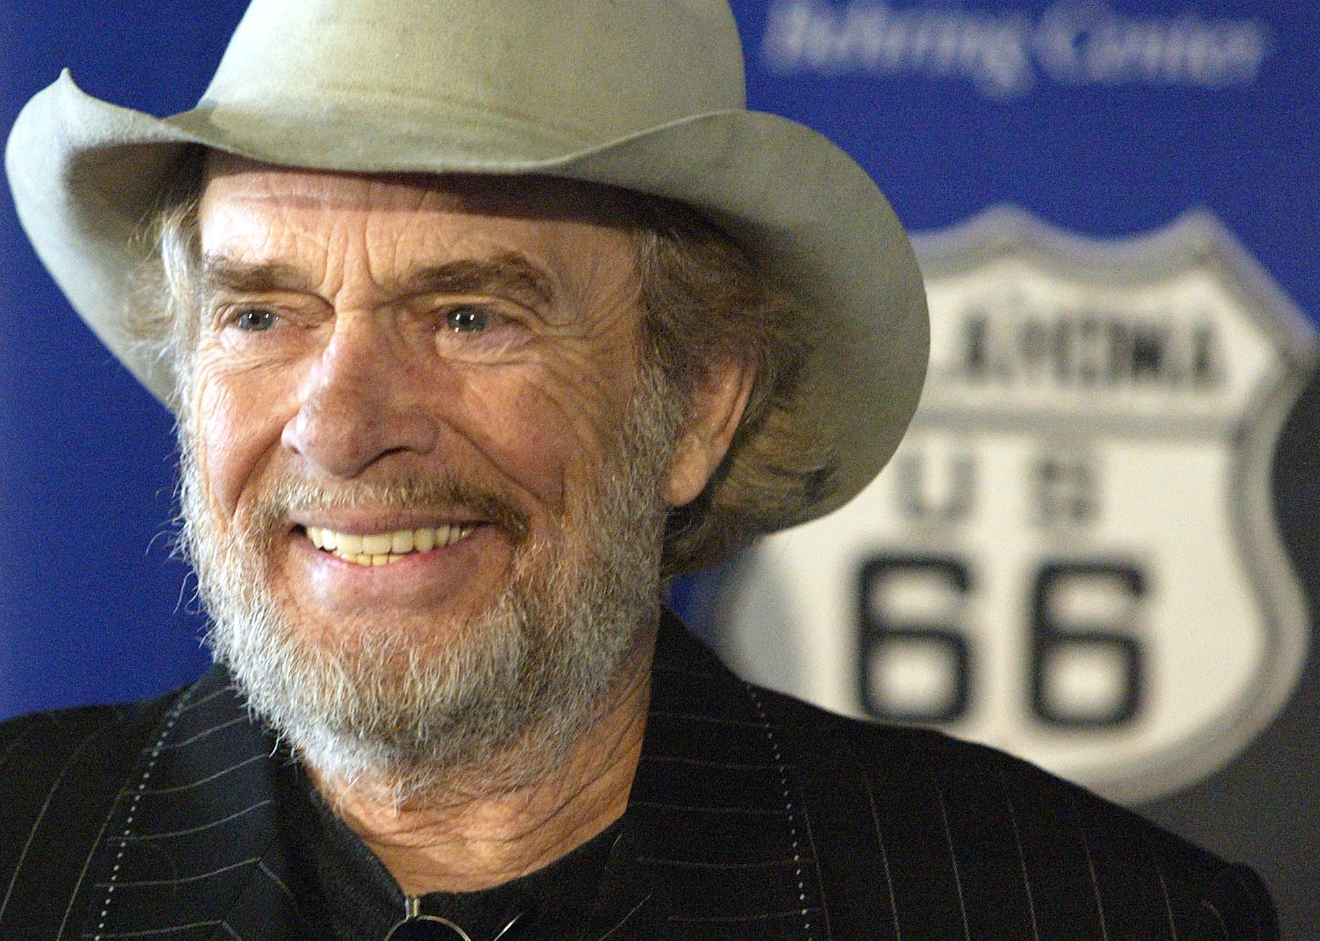 Where can you find Merle Haggard's obituary?